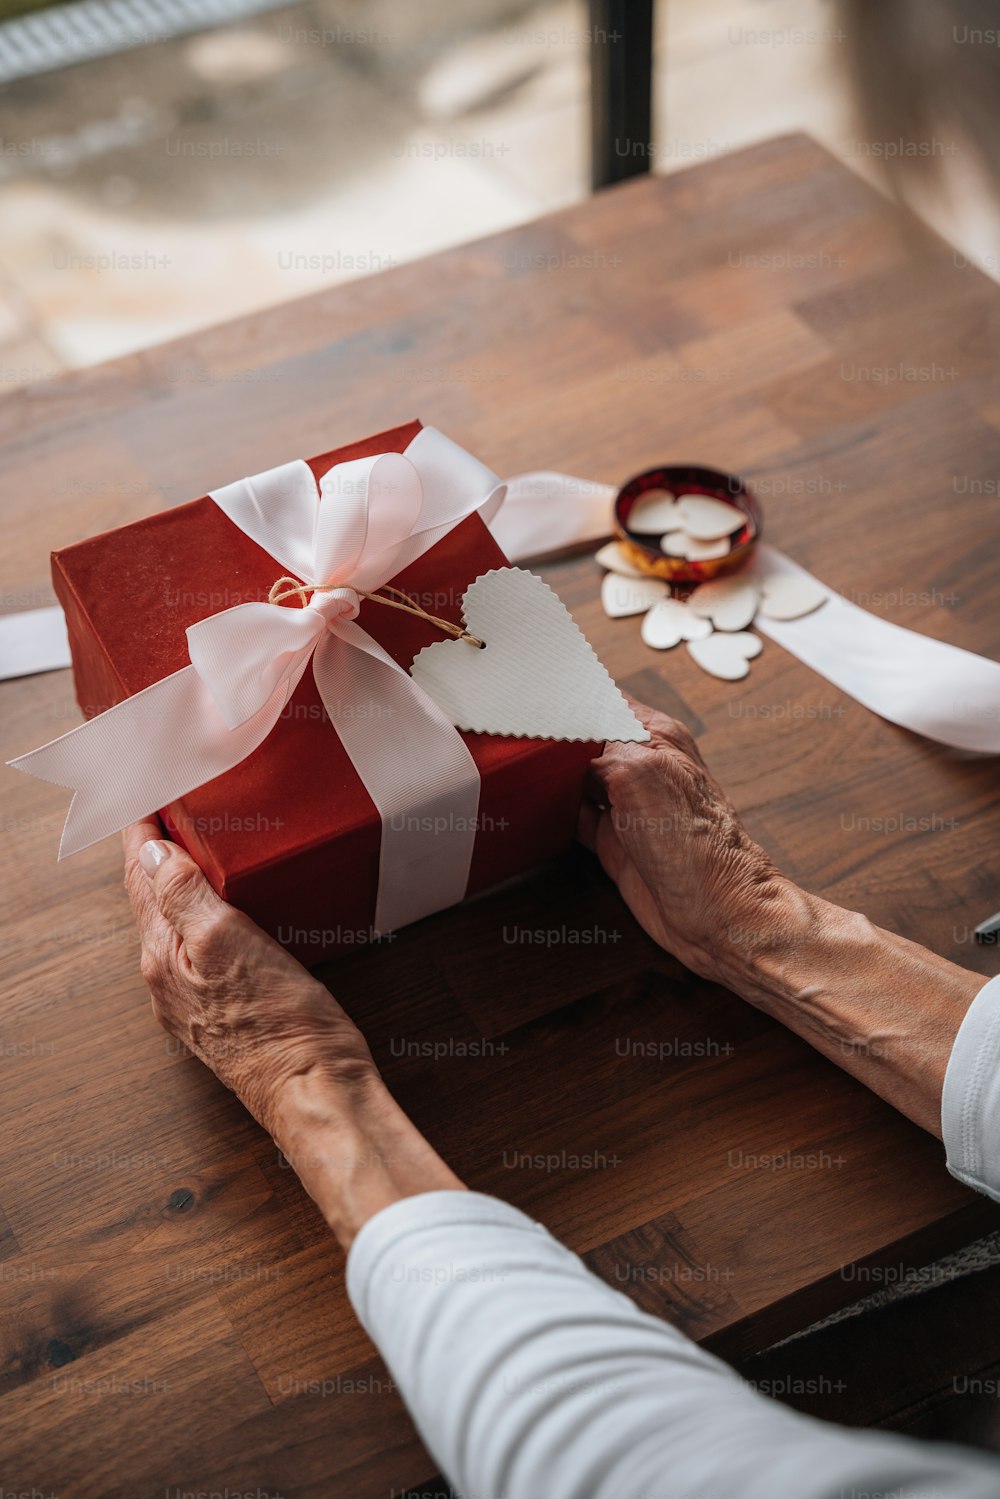 a person holding a red and white gift box